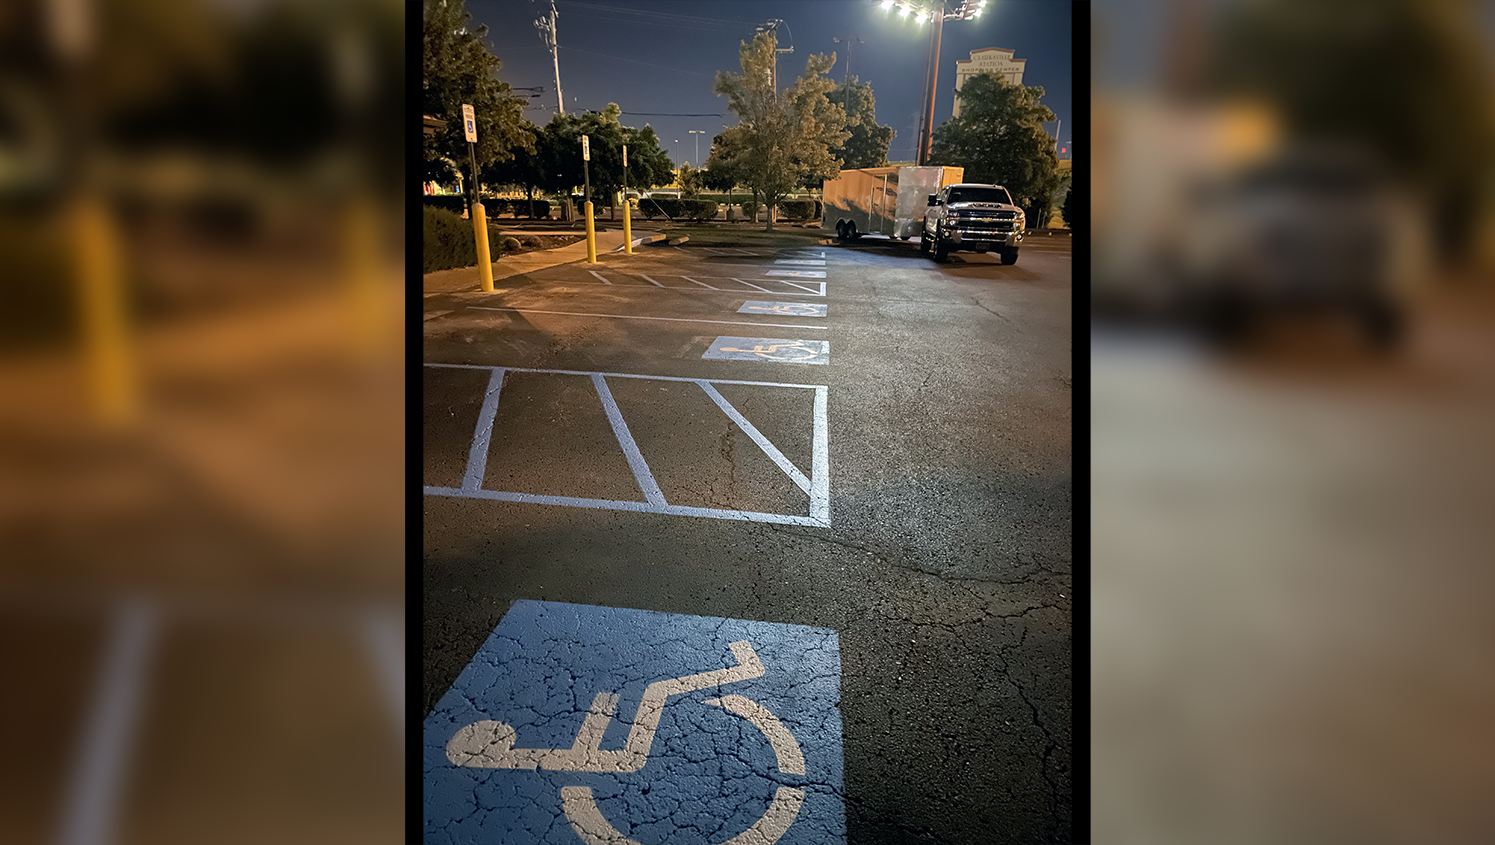 newly striped ada parking spaces for cheddar’s scratch kitchen